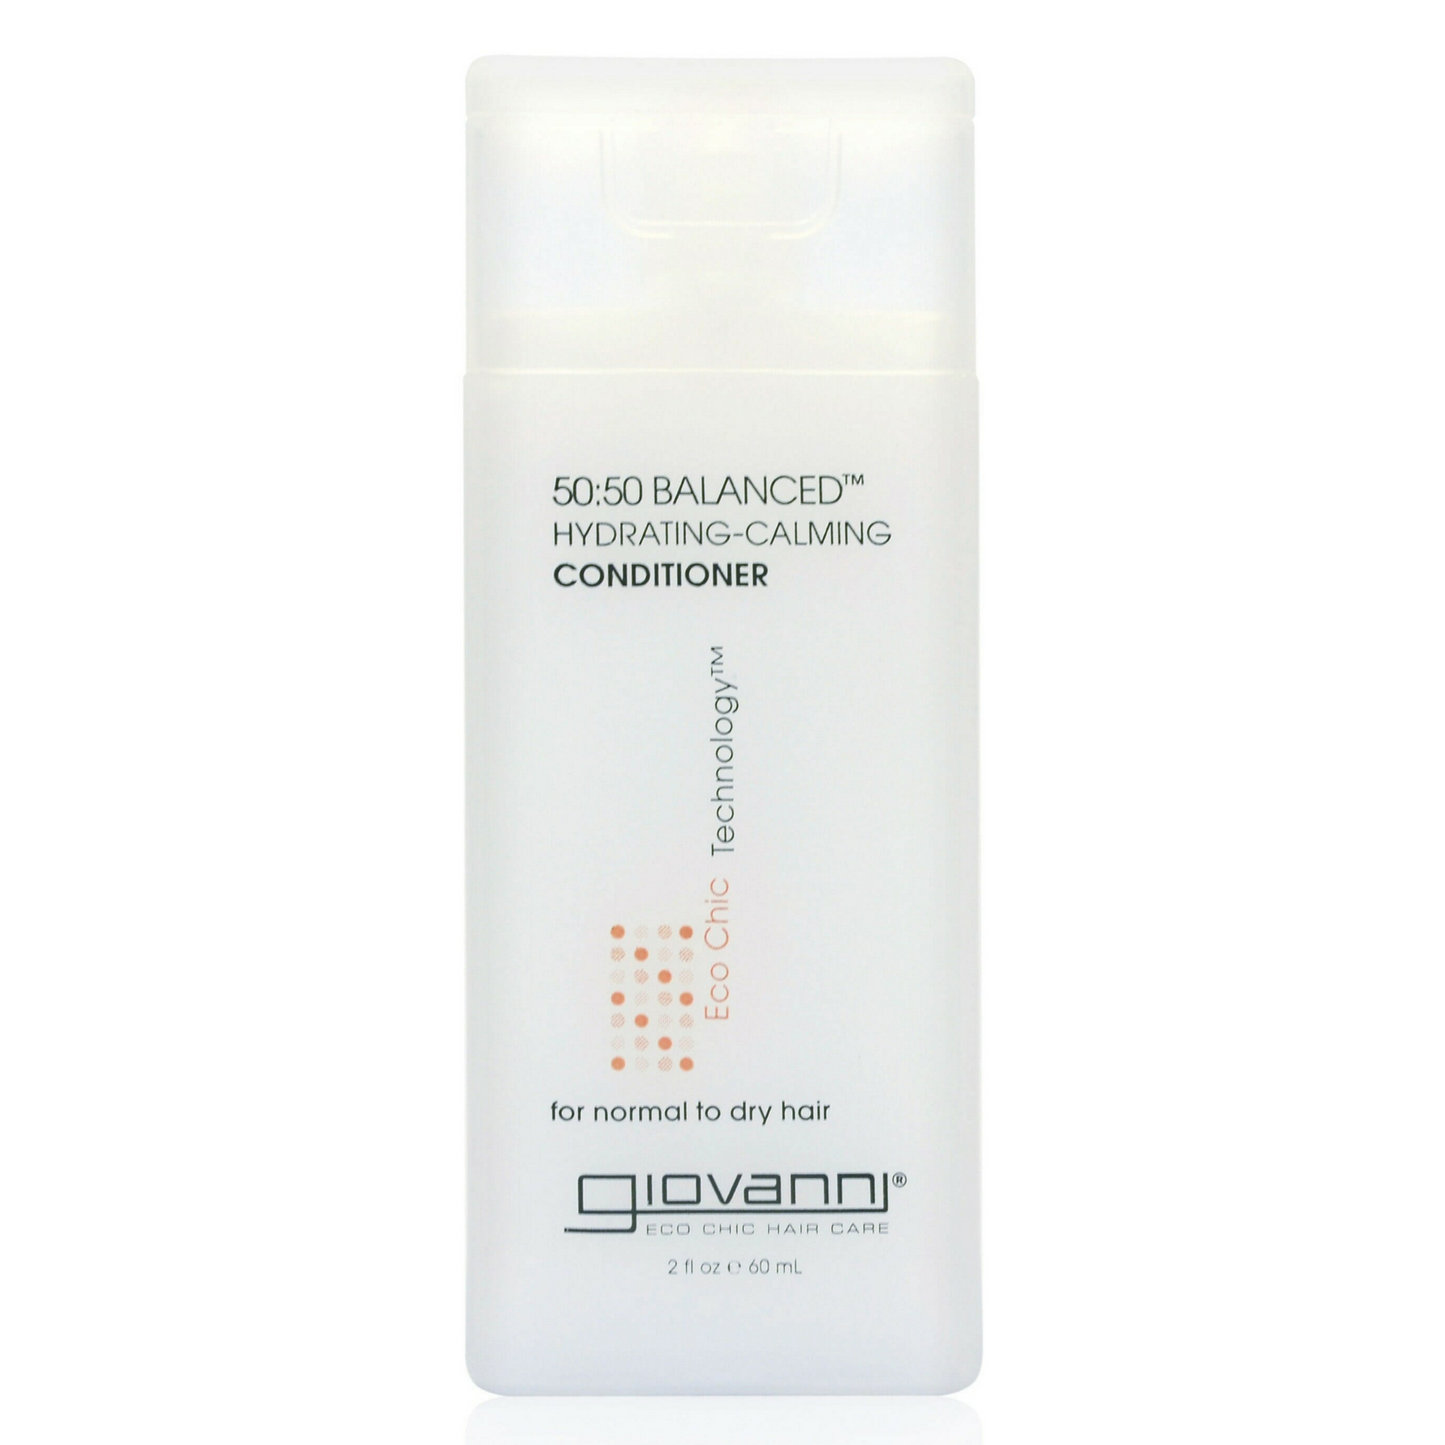 Primary Image of Trial Size 50:50 Balanced Hydrating-Clarifying Conditioner